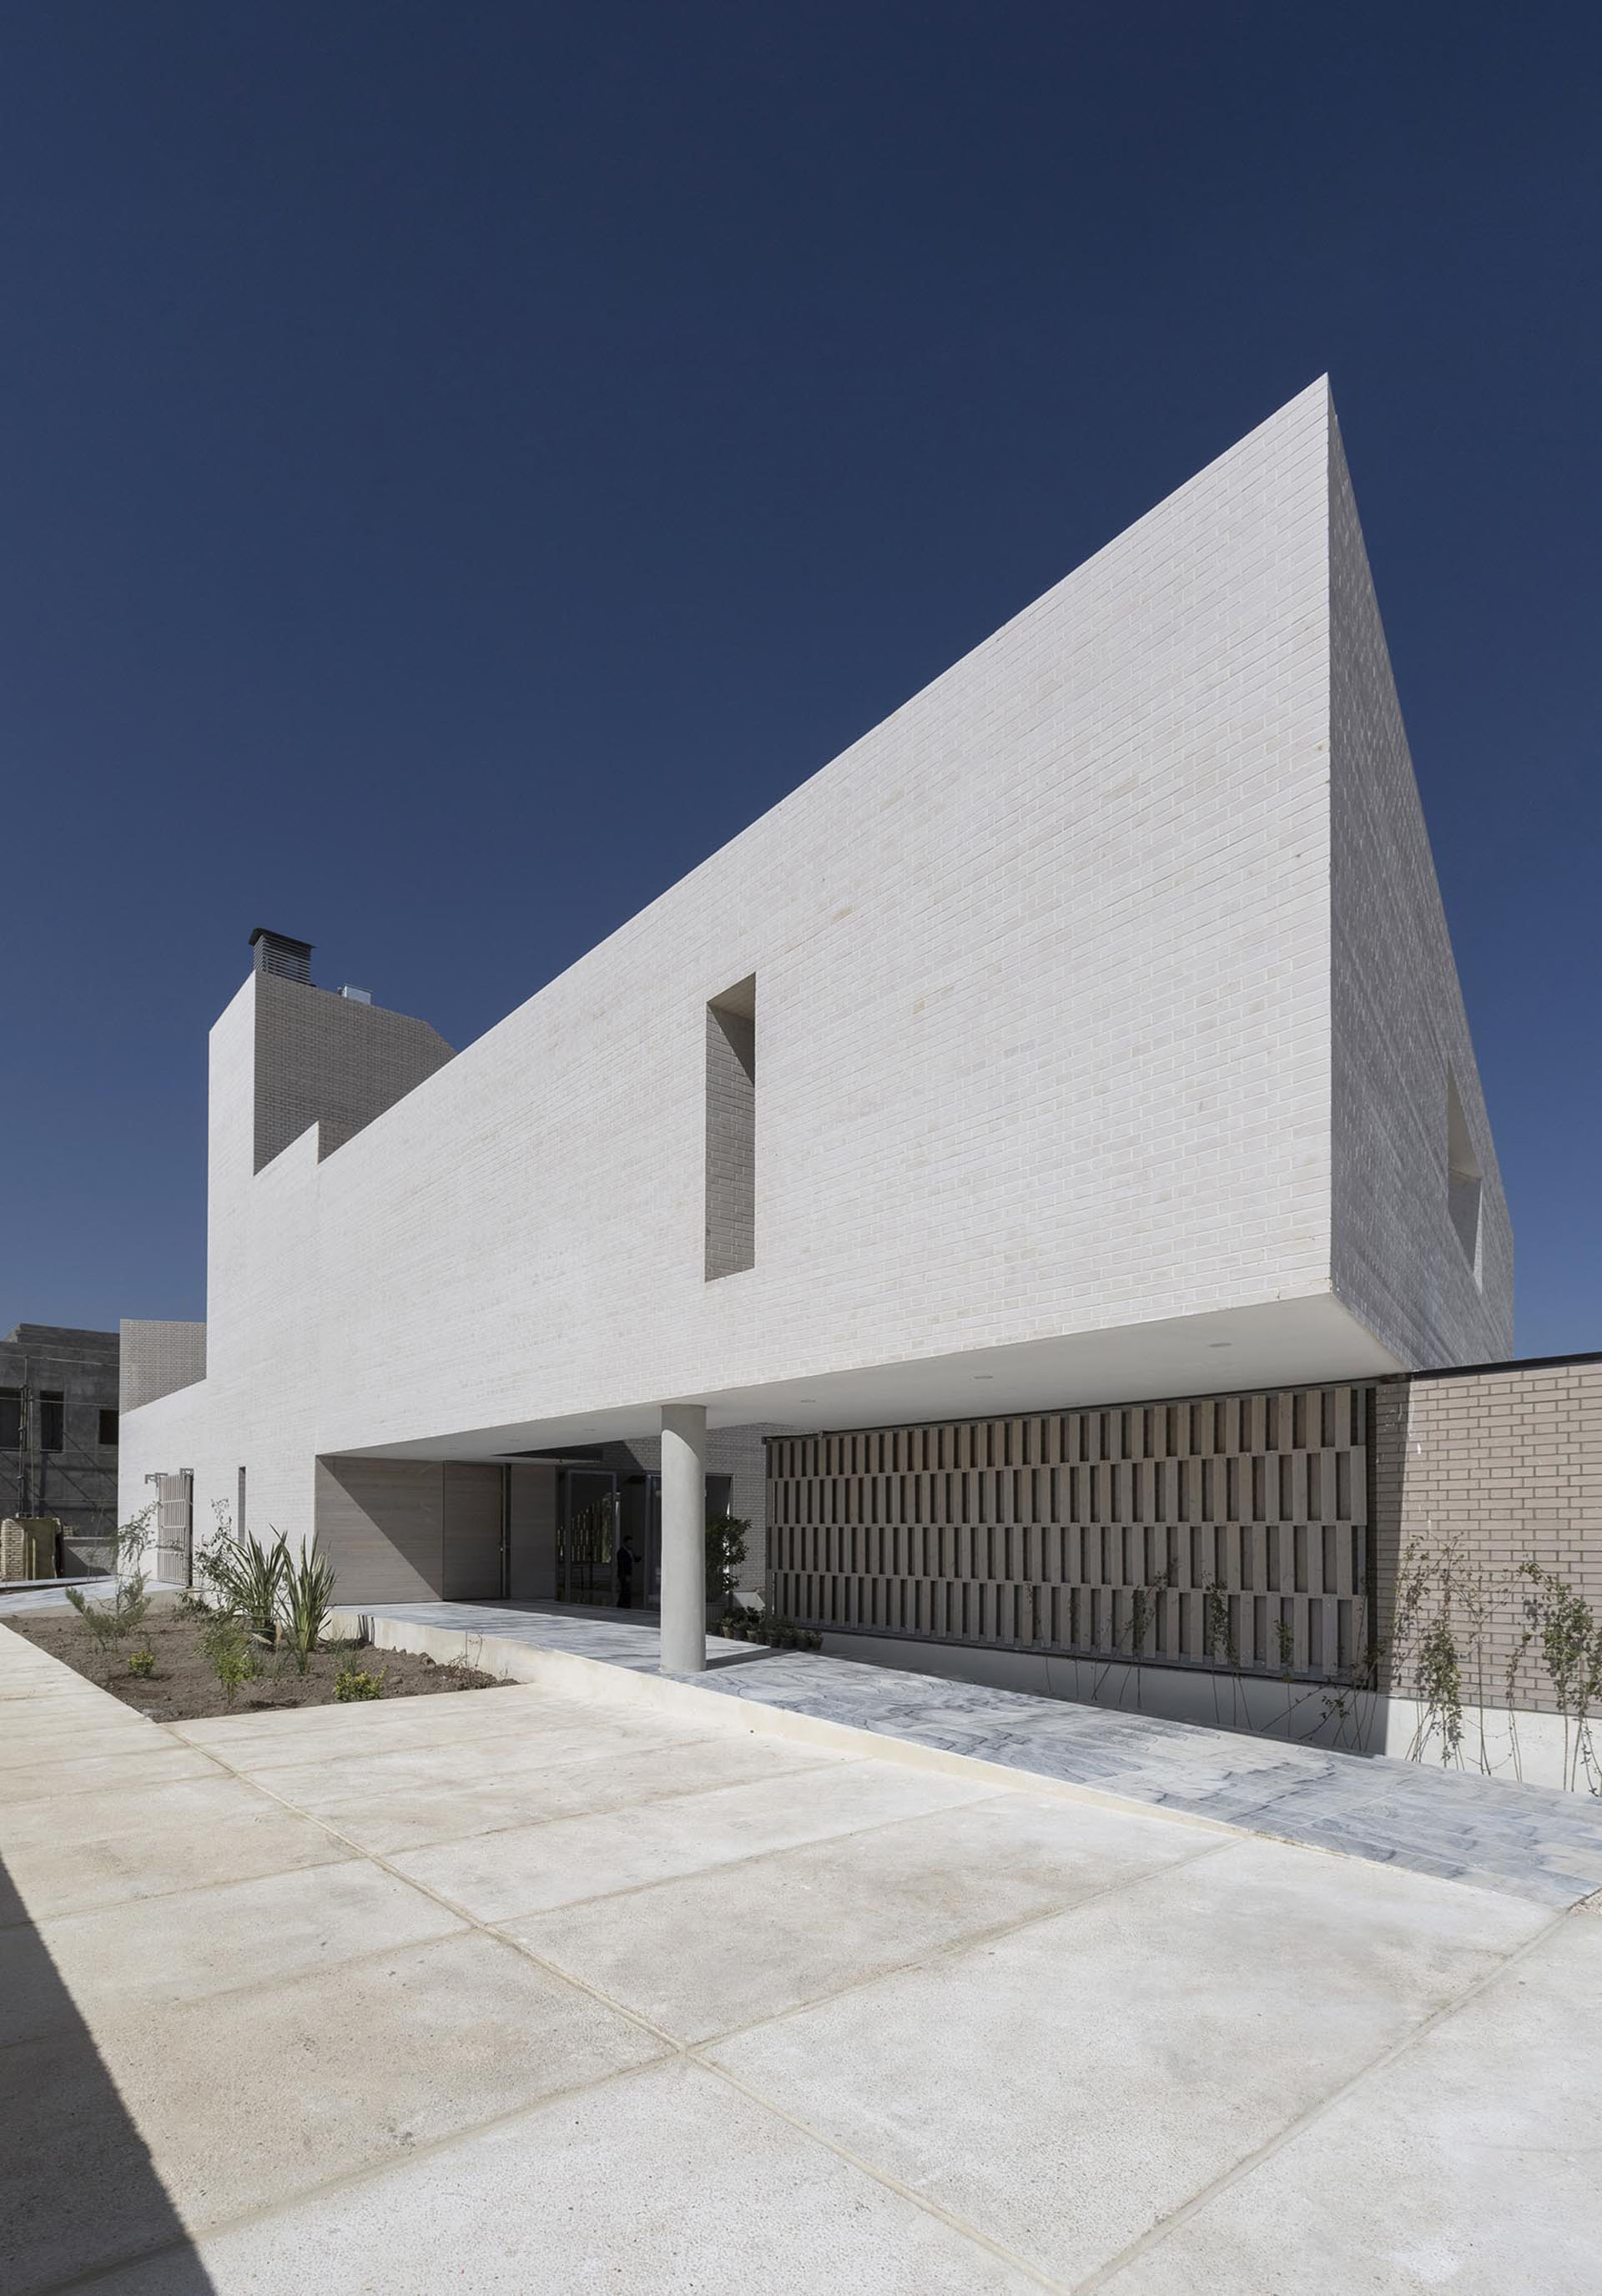 <p>The project's structure is constructed out of sheer walls and columns as well as concrete slabs.</p>